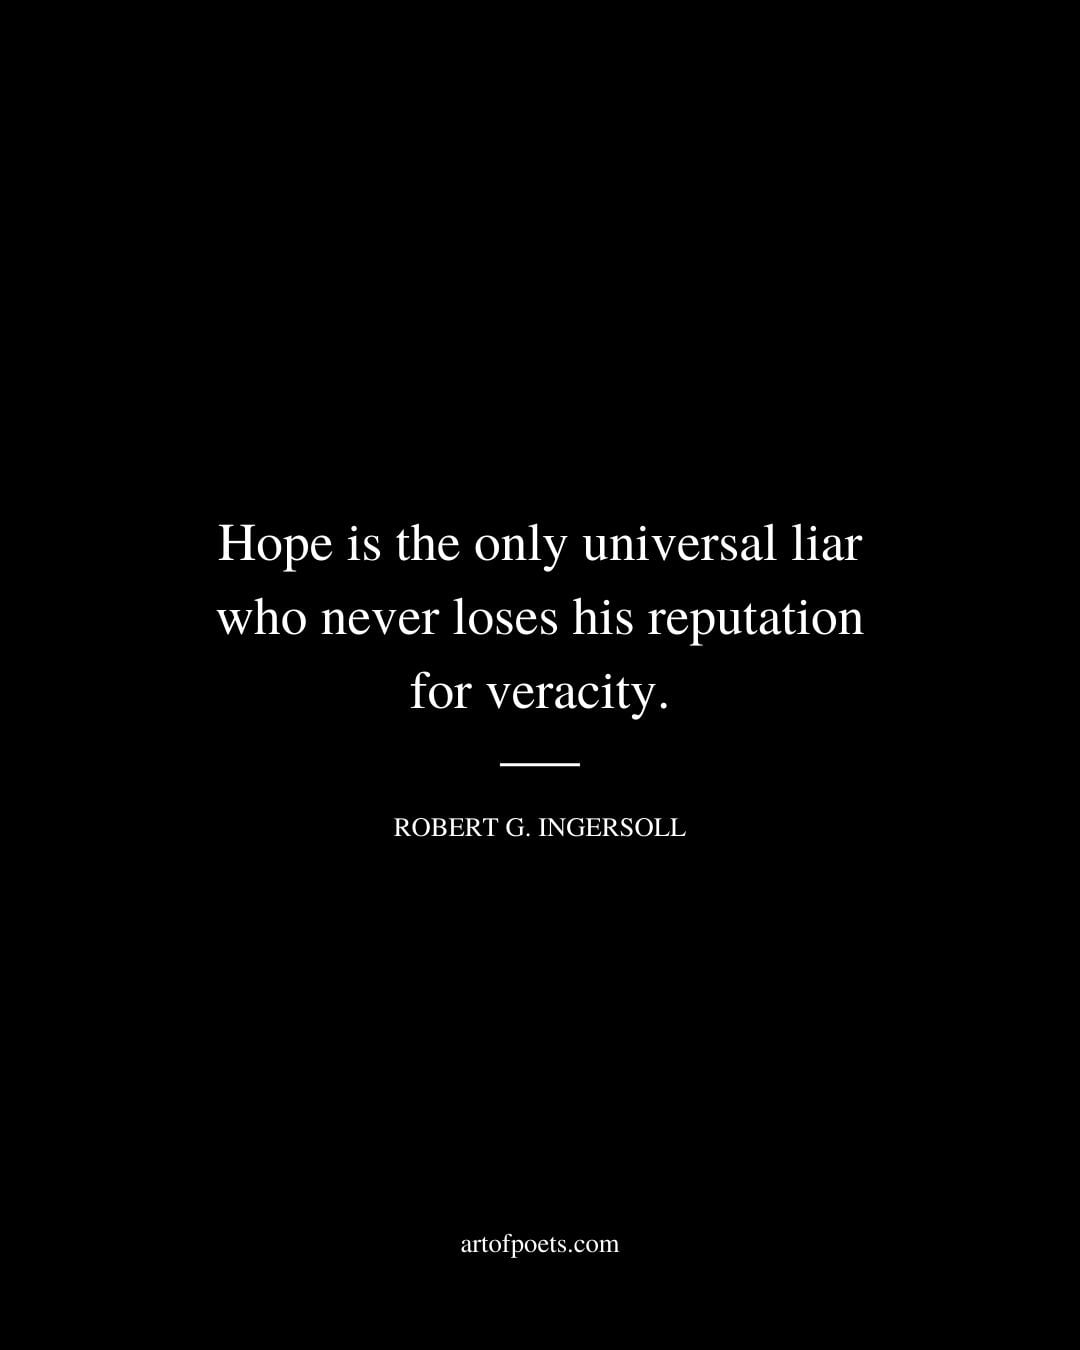 Hope is the only universal liar who never loses his reputation for veracity. Robert G. Ingersoll